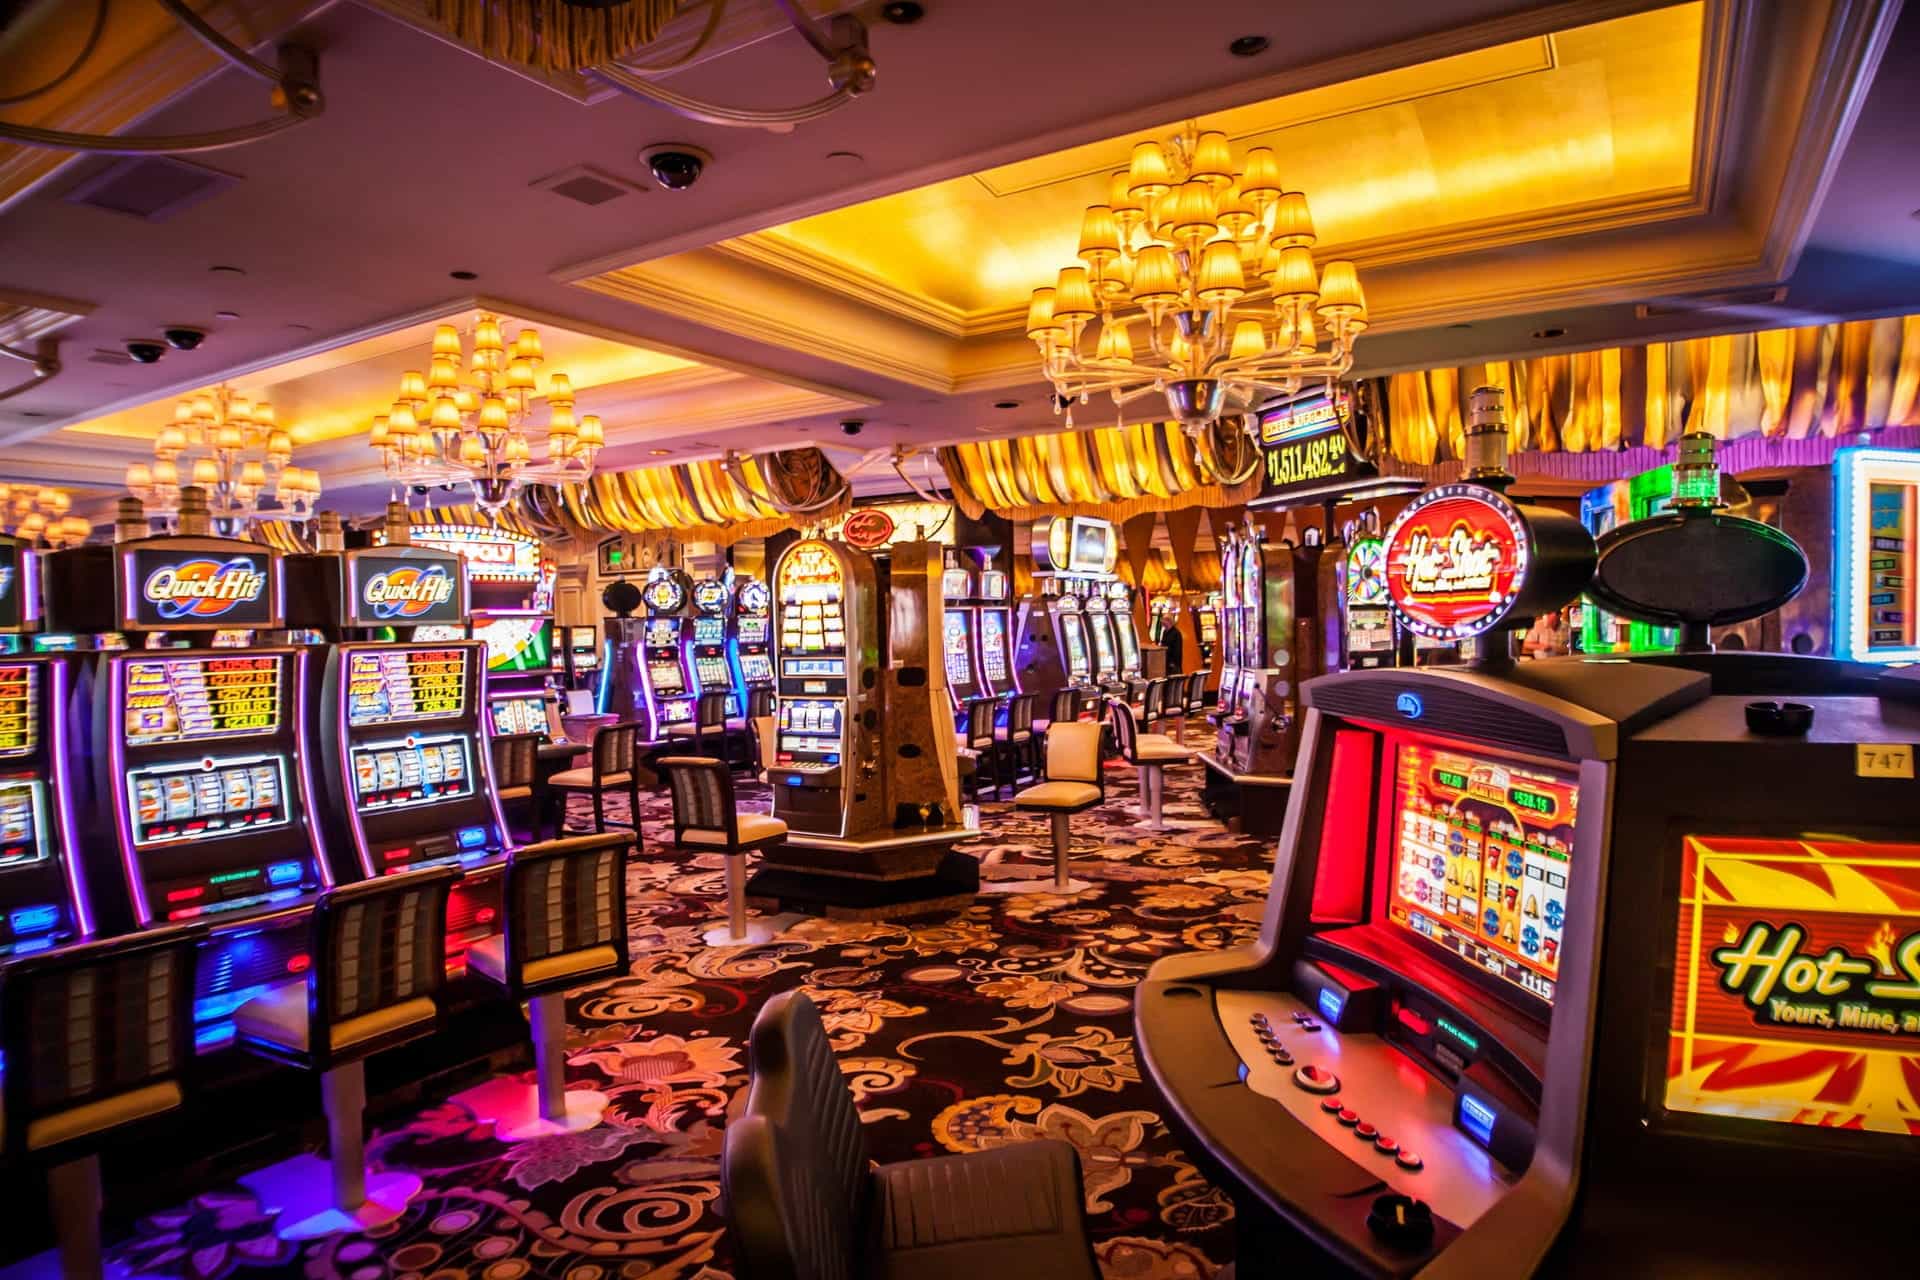 A casino floor shows a variety of colorful slot machines.